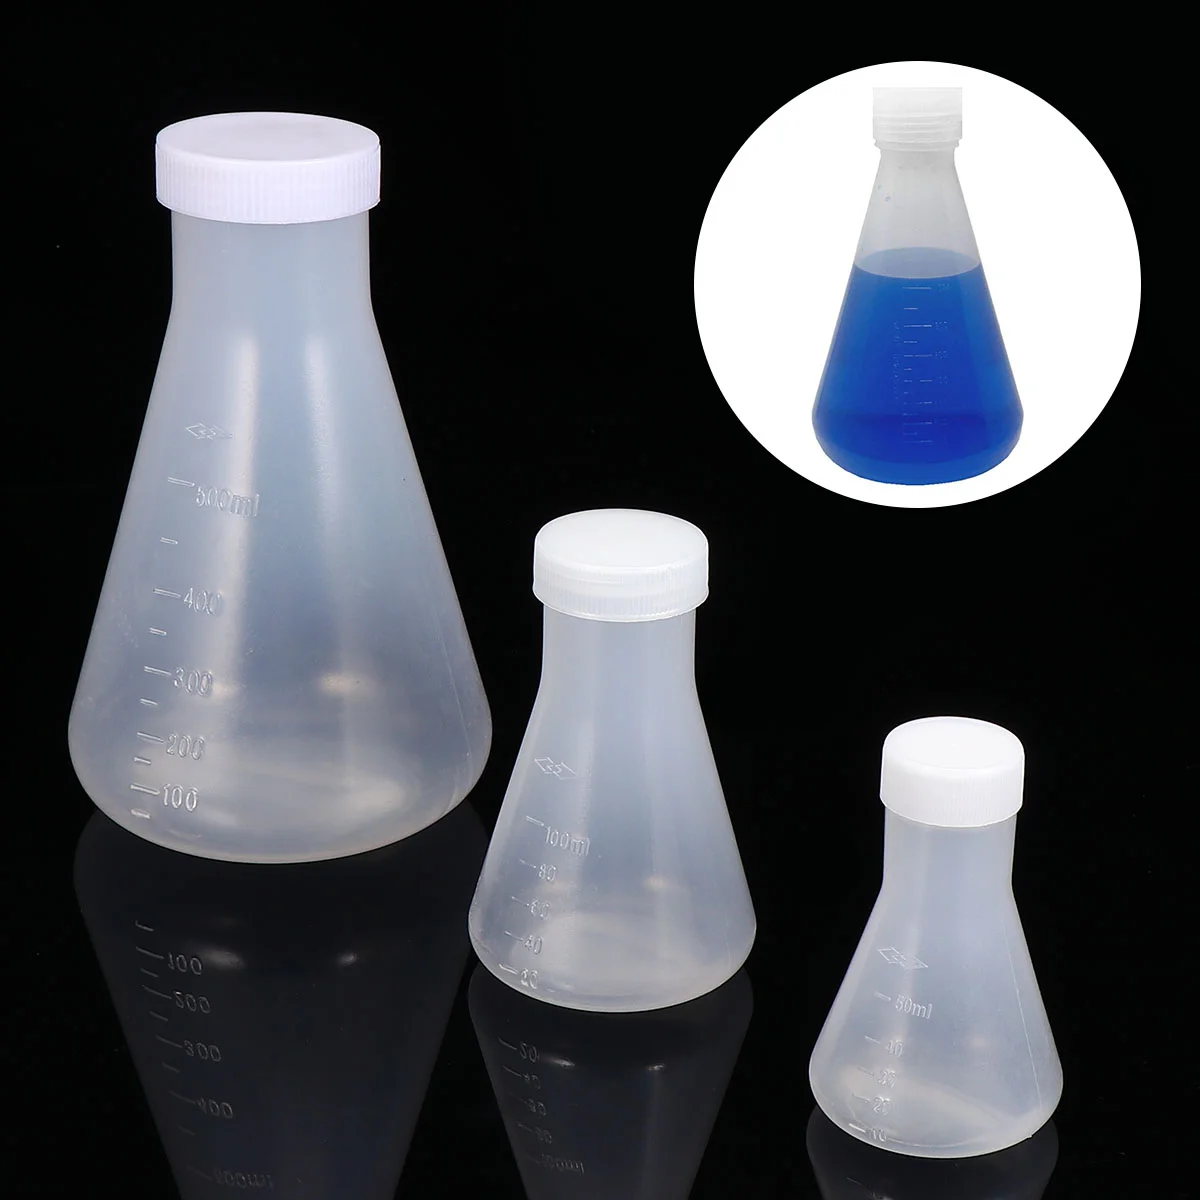 

Conical Flask 3Pcs Conical Flasks with Screw Caps Visible Measuring Cups for Laboratory Students Experiment Chemistry ( 50ml+